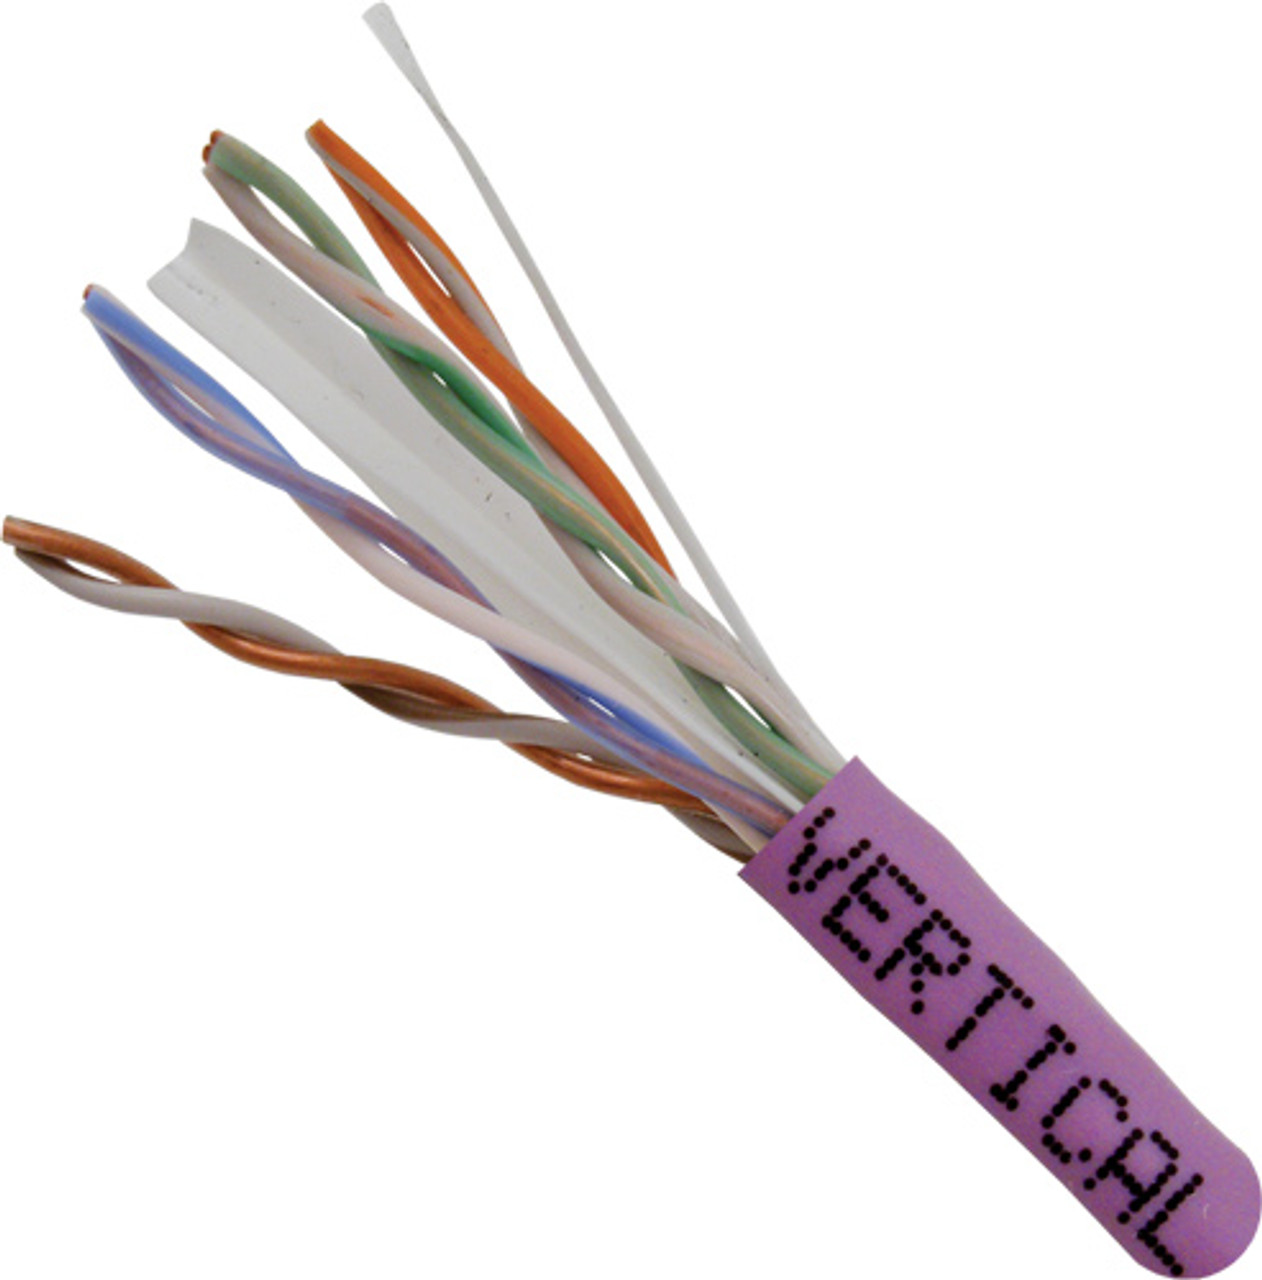 CAT6A Cable, CMR (Riser-Rated) UTP (Unshielded Twisted Pairs), 23 AWG Solid-Bare Copper, Wooden Spool, 1000 ft. Purple